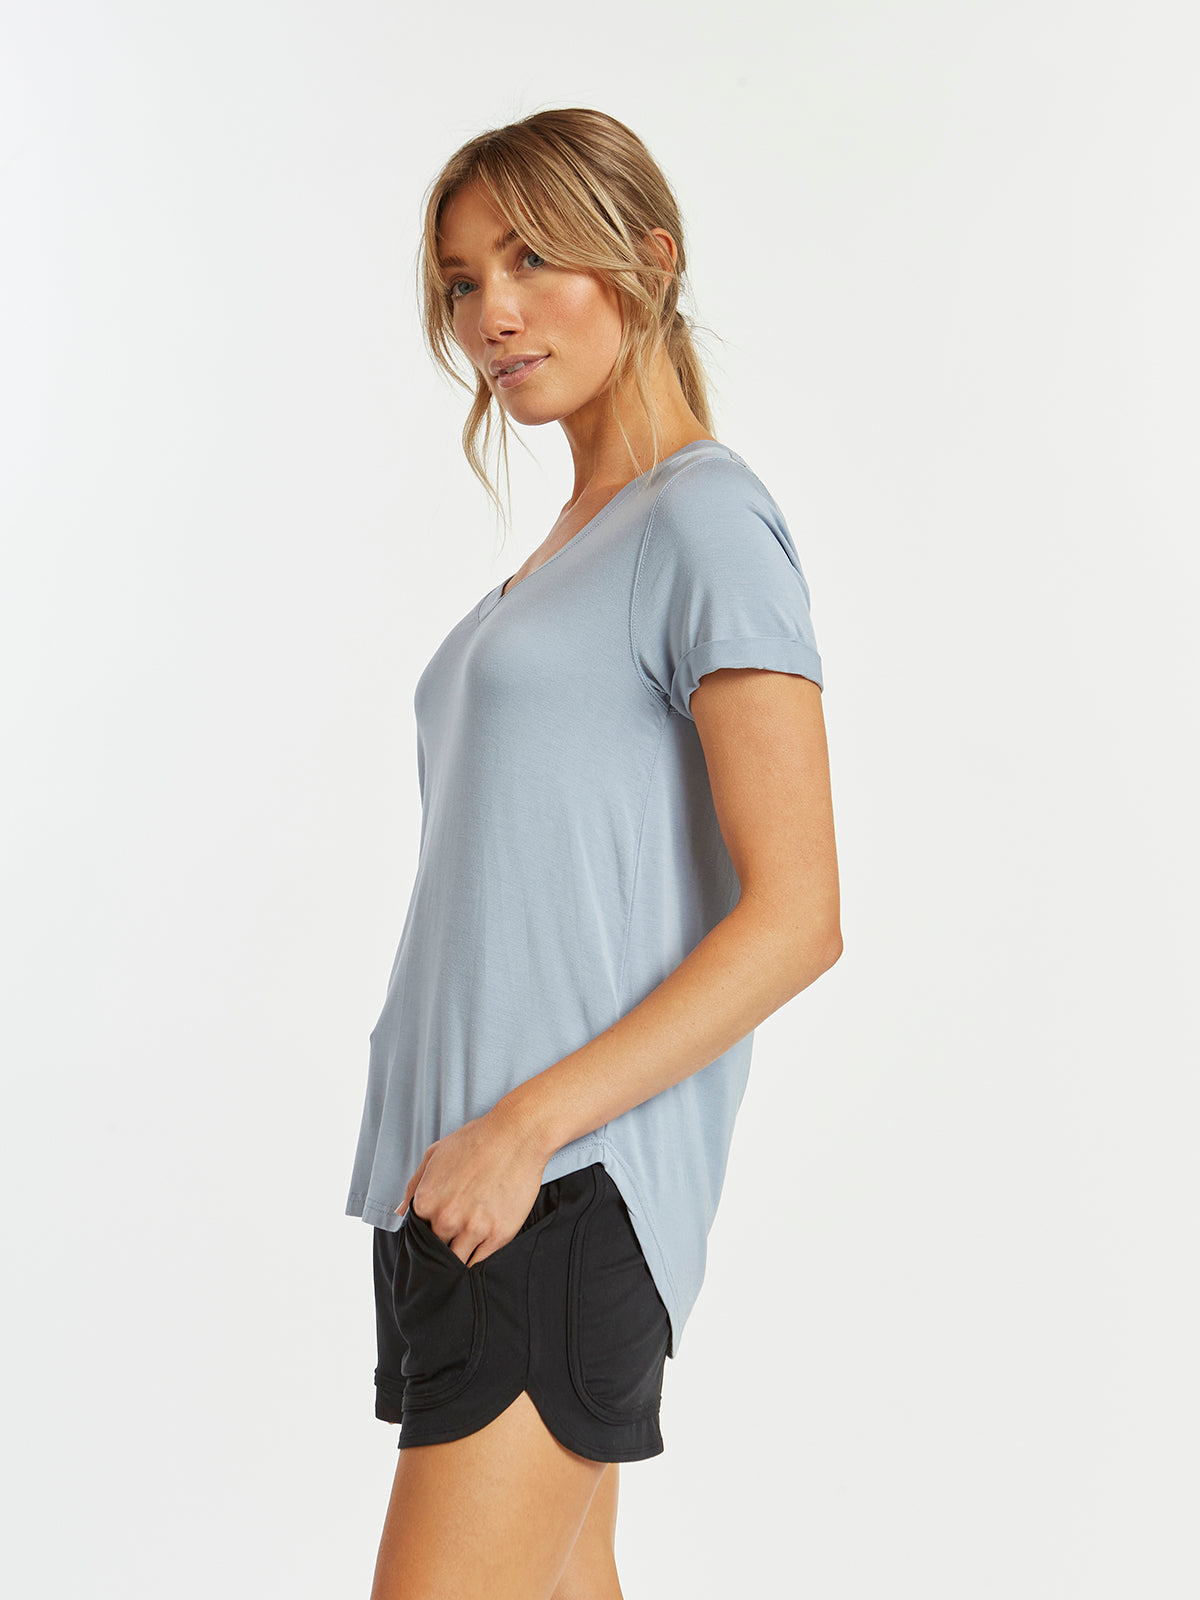 LANELLE TEE - PRE PACK 6 UNITS